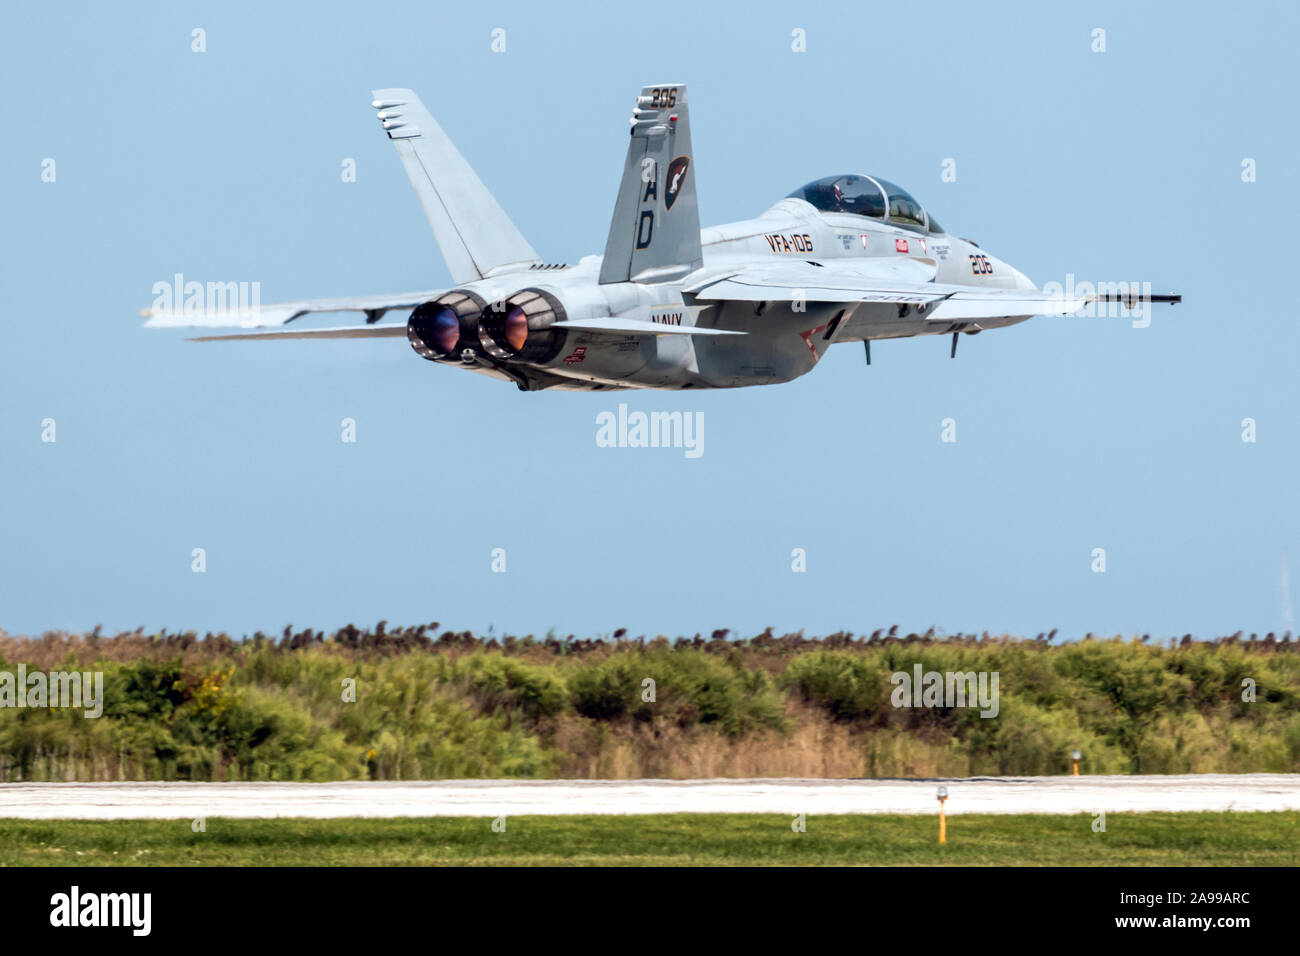 CLEVELAND, OHIO / USA - September 4, 2015: An F/A-18 Super Hornet performs a demo at the 2015 Cleveland International Airshow. Stock Photo